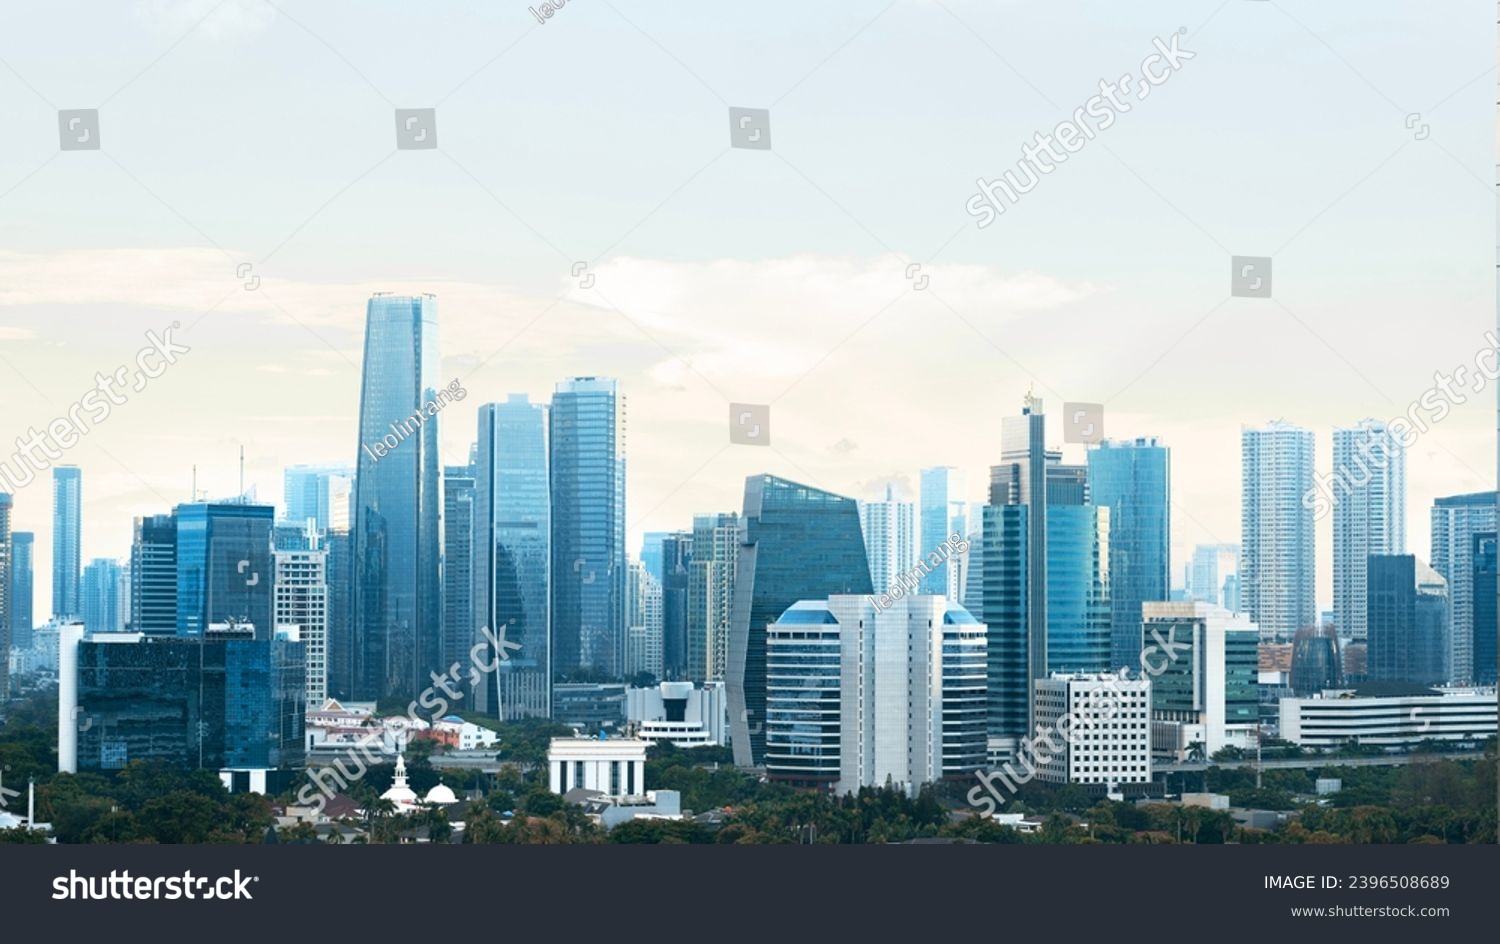 Panoramic Jakarta skyline with urban skyscrapers in the afternoon. Jakarta, Indonesia #2396508689